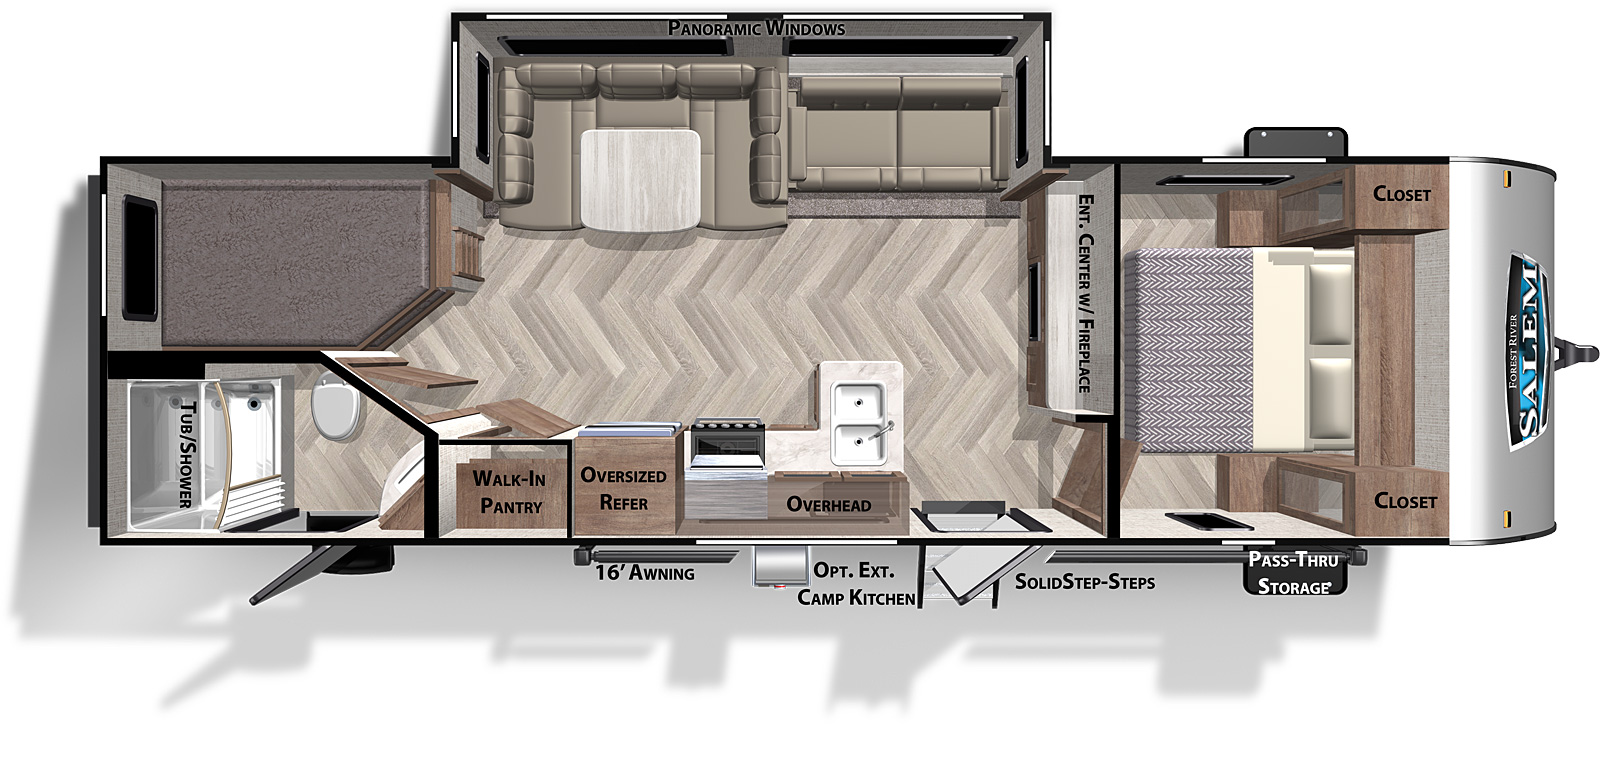 Cruise Lite Northwest 263BHXL floorplan. The 263BHXL has one slide out and one entry door.